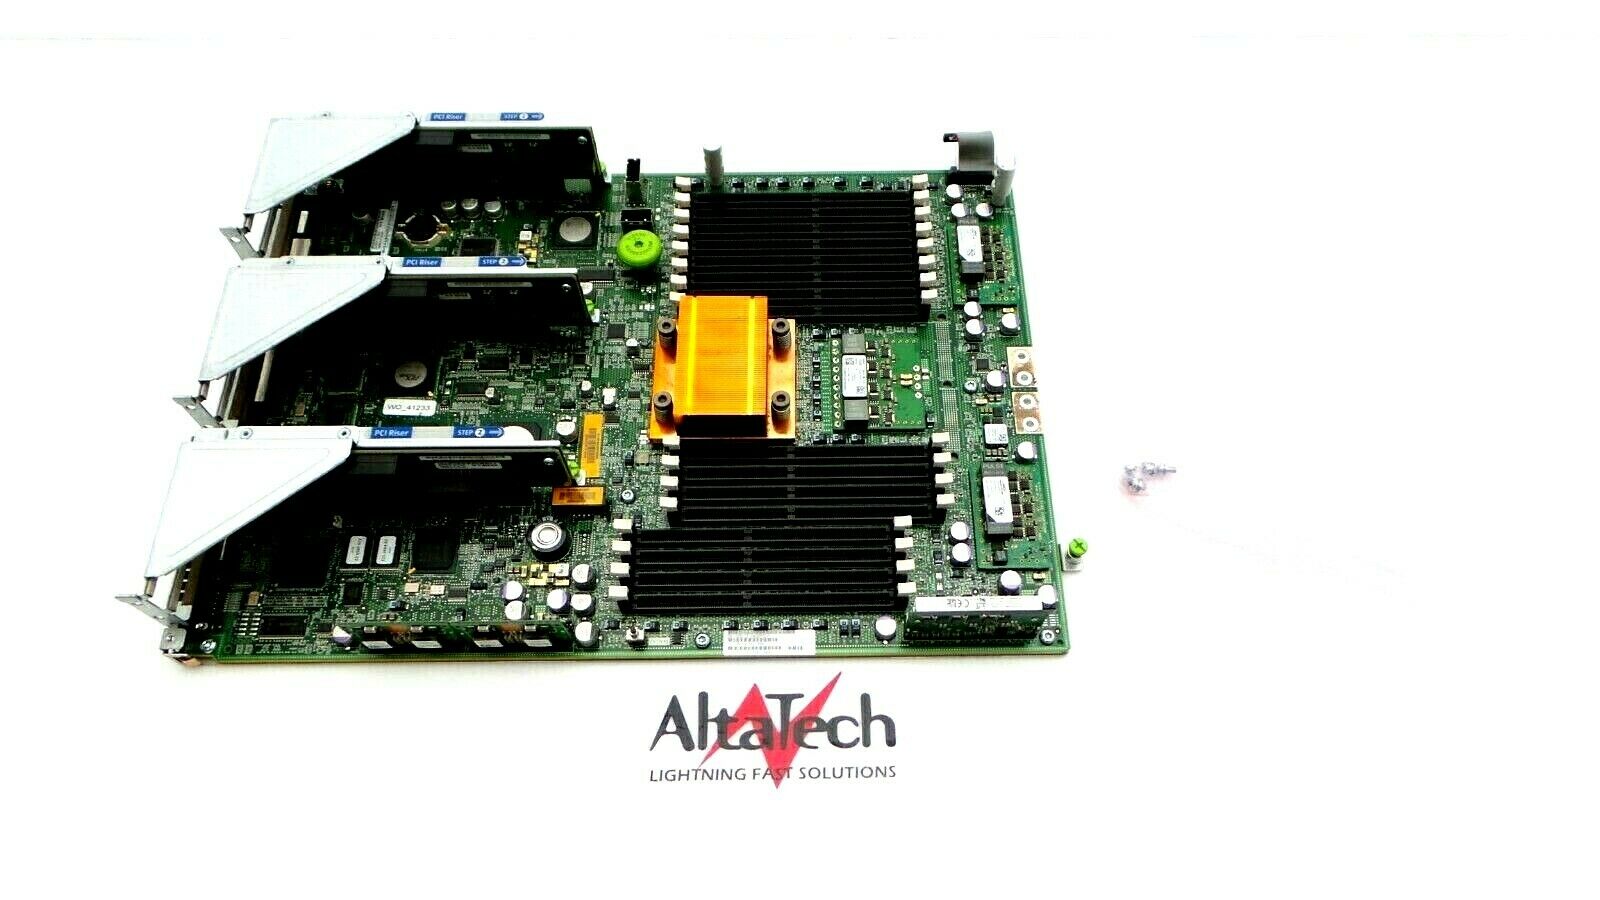 Oracle 511-1320 SPARC Enterprise 1.6GHz 8-Core System Board, Used